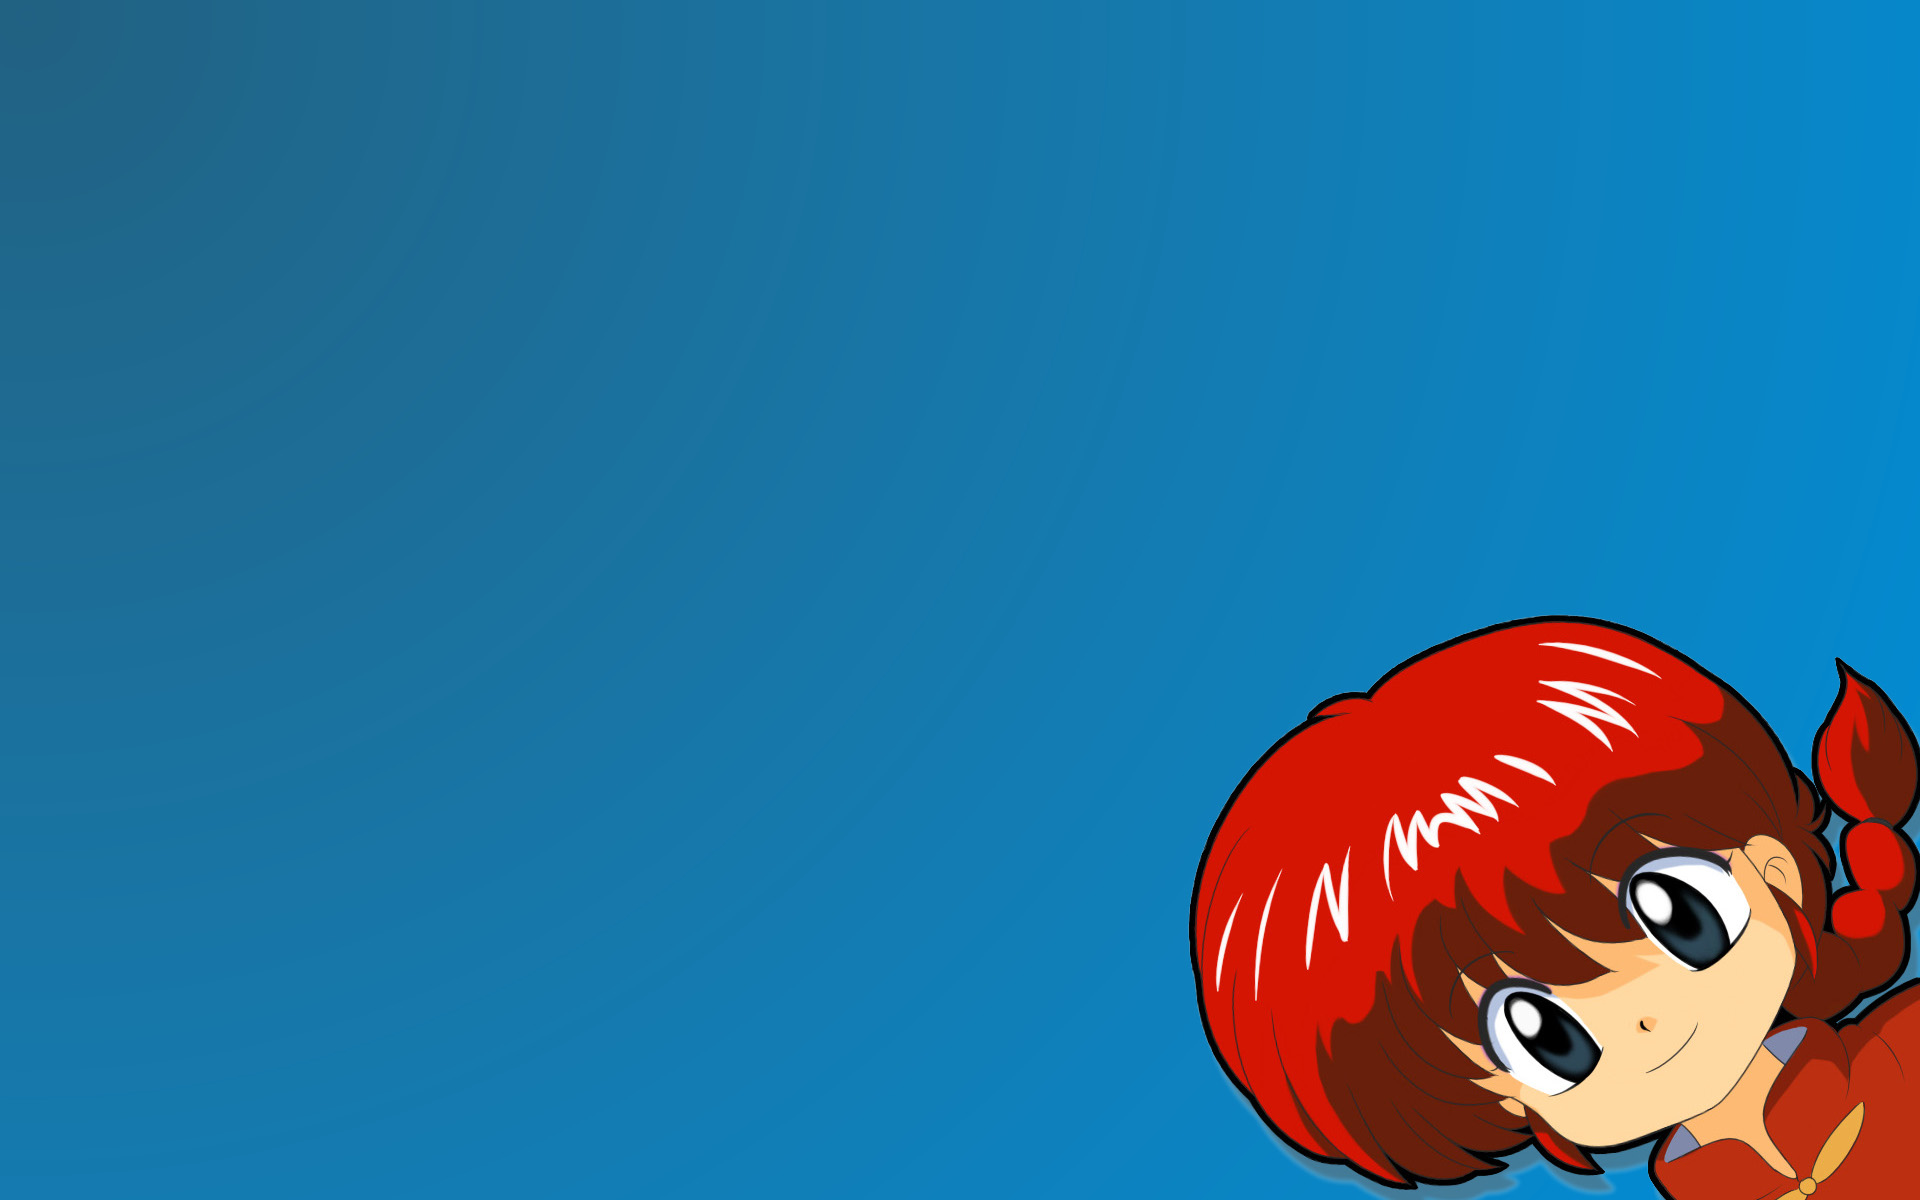 Console Writeline Ranma HD Anime Linux Style In